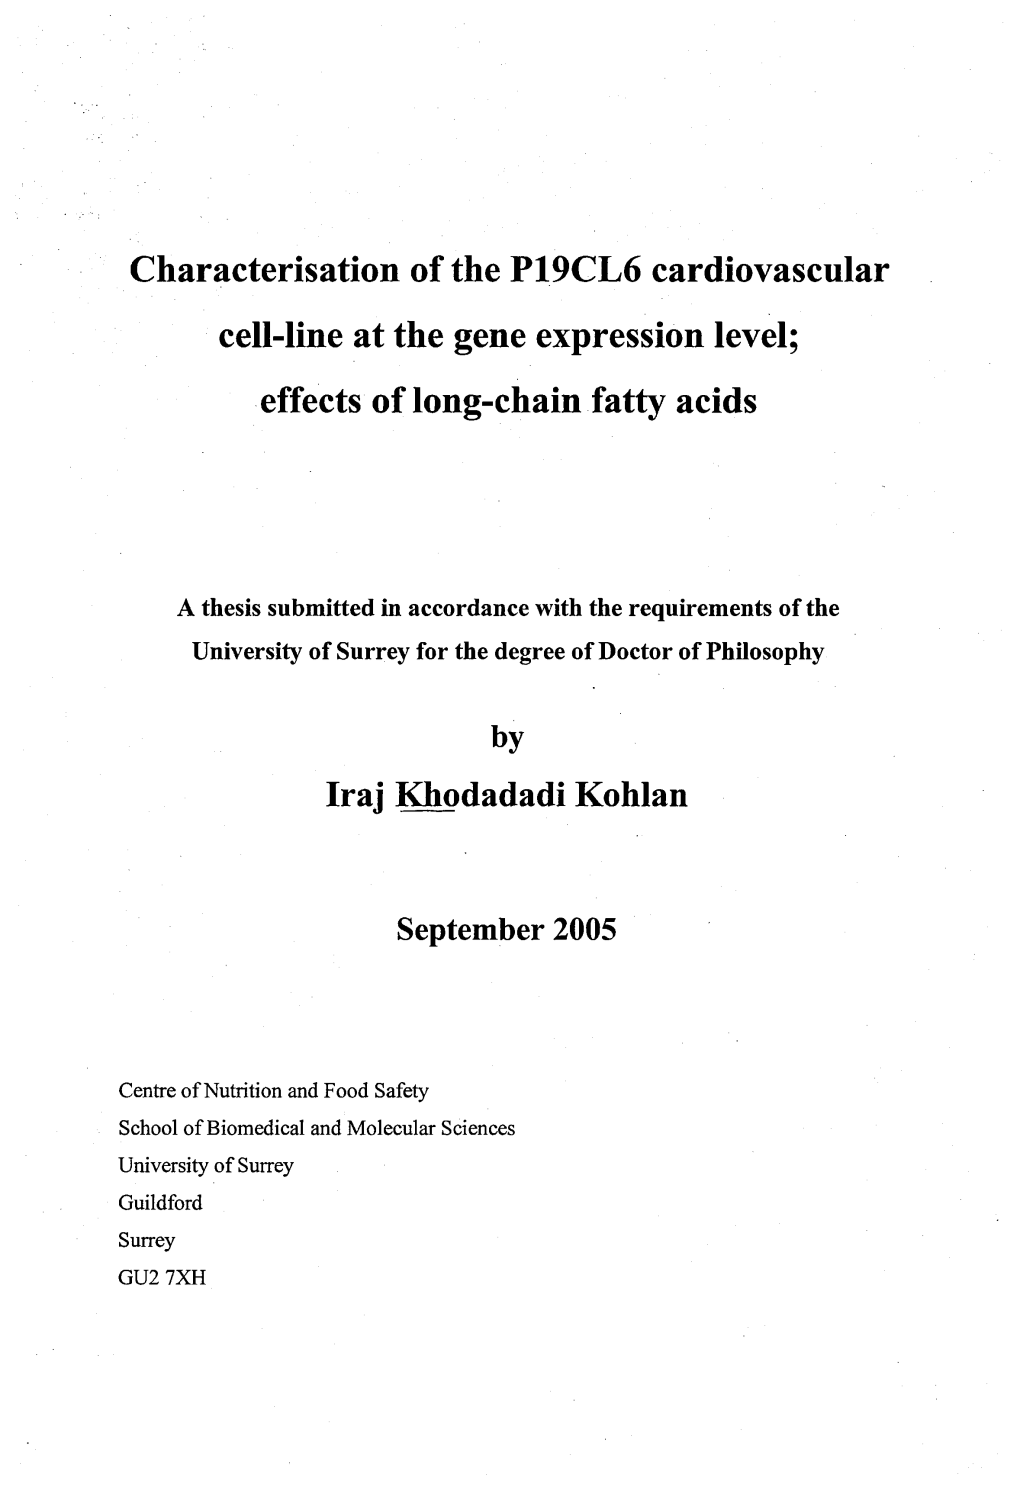 Characterisation of the P19CL6 Cardiovascular Cell-Line at the Gene Expression Level; Effects of Long-Chain Fatty Acids